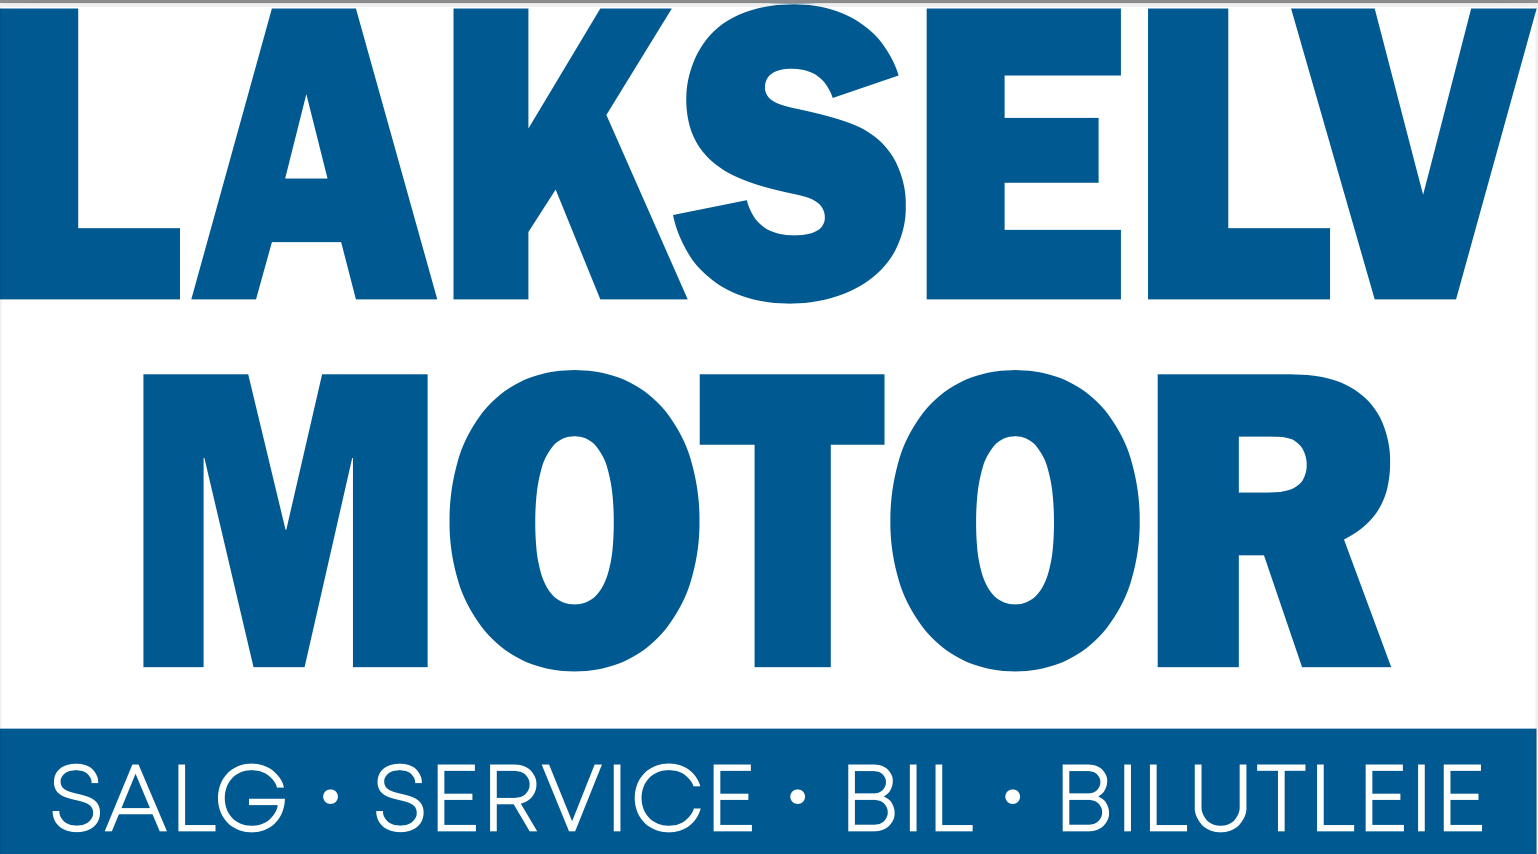 Lakselv Motor AS